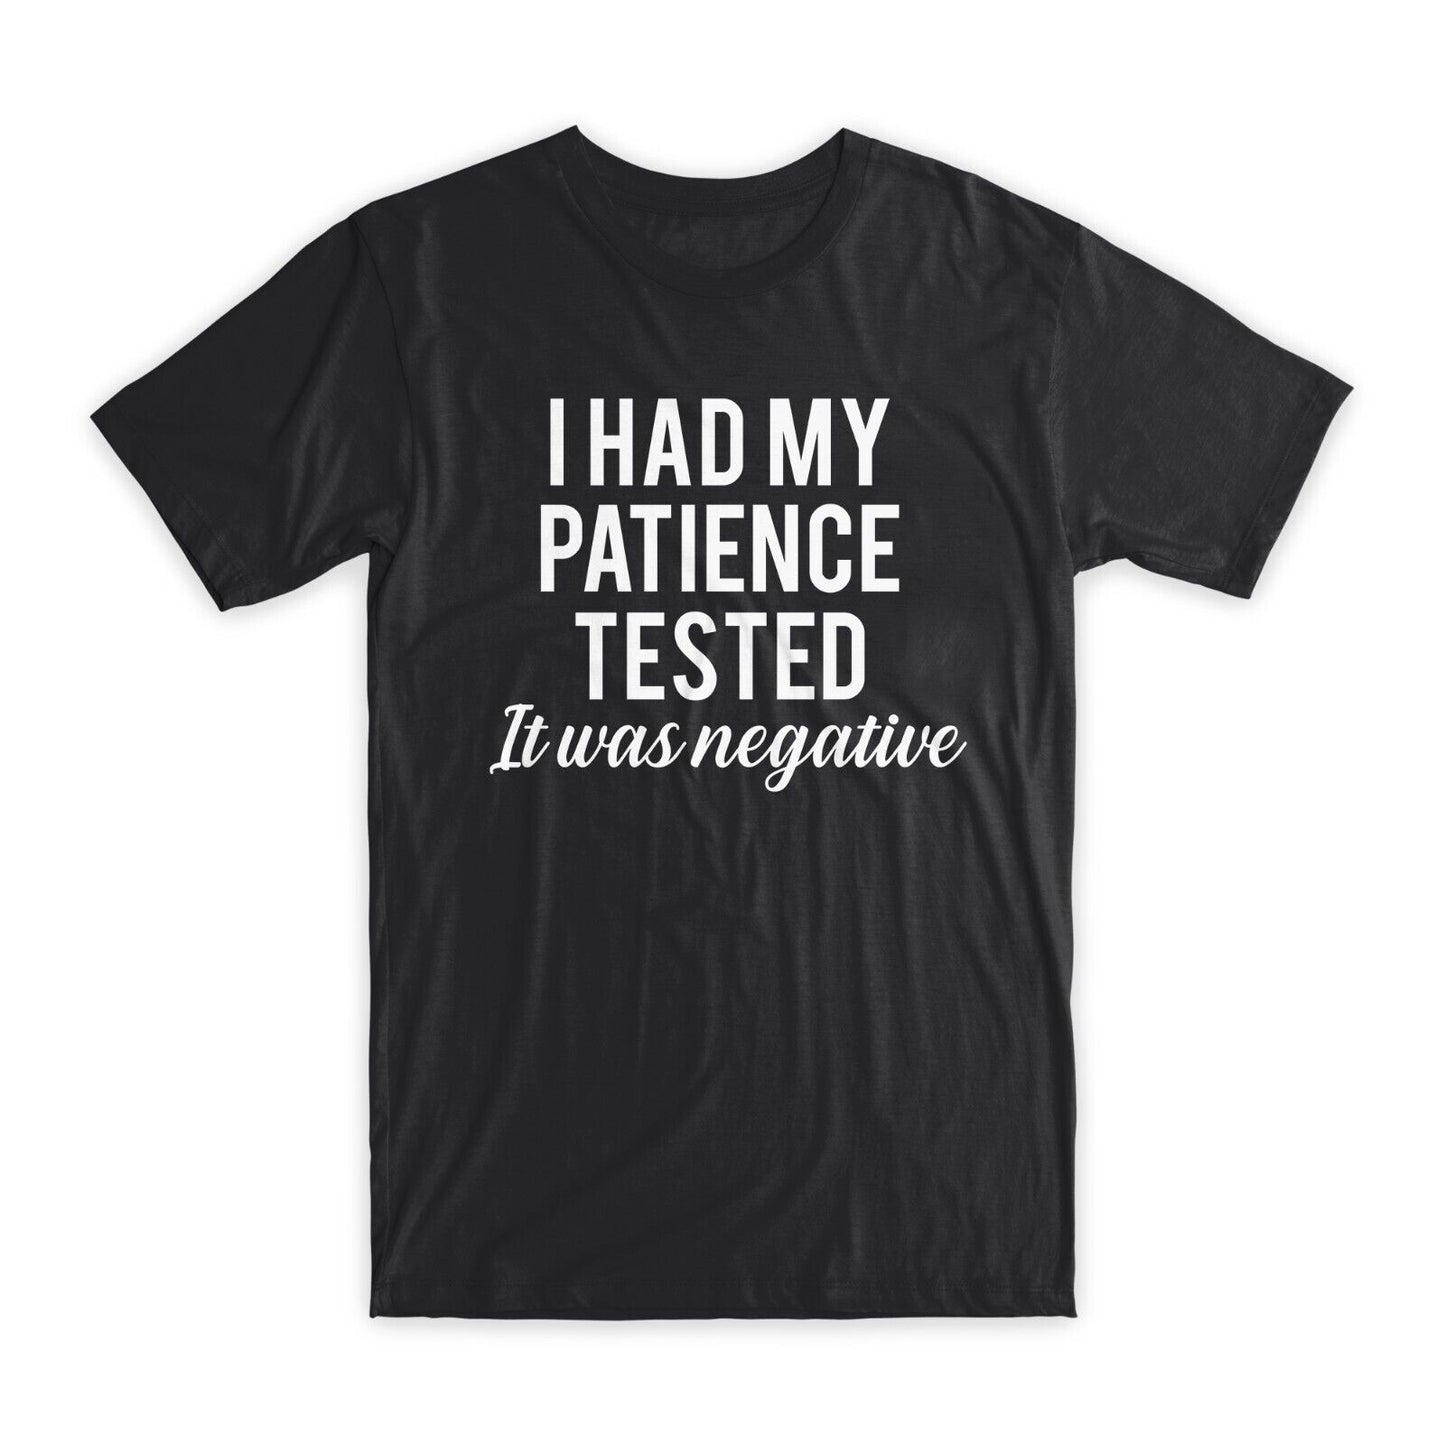 I Had My Patience Tested T-Shirt Premium Soft Cotton Funny Tees Novelty Gift NEW